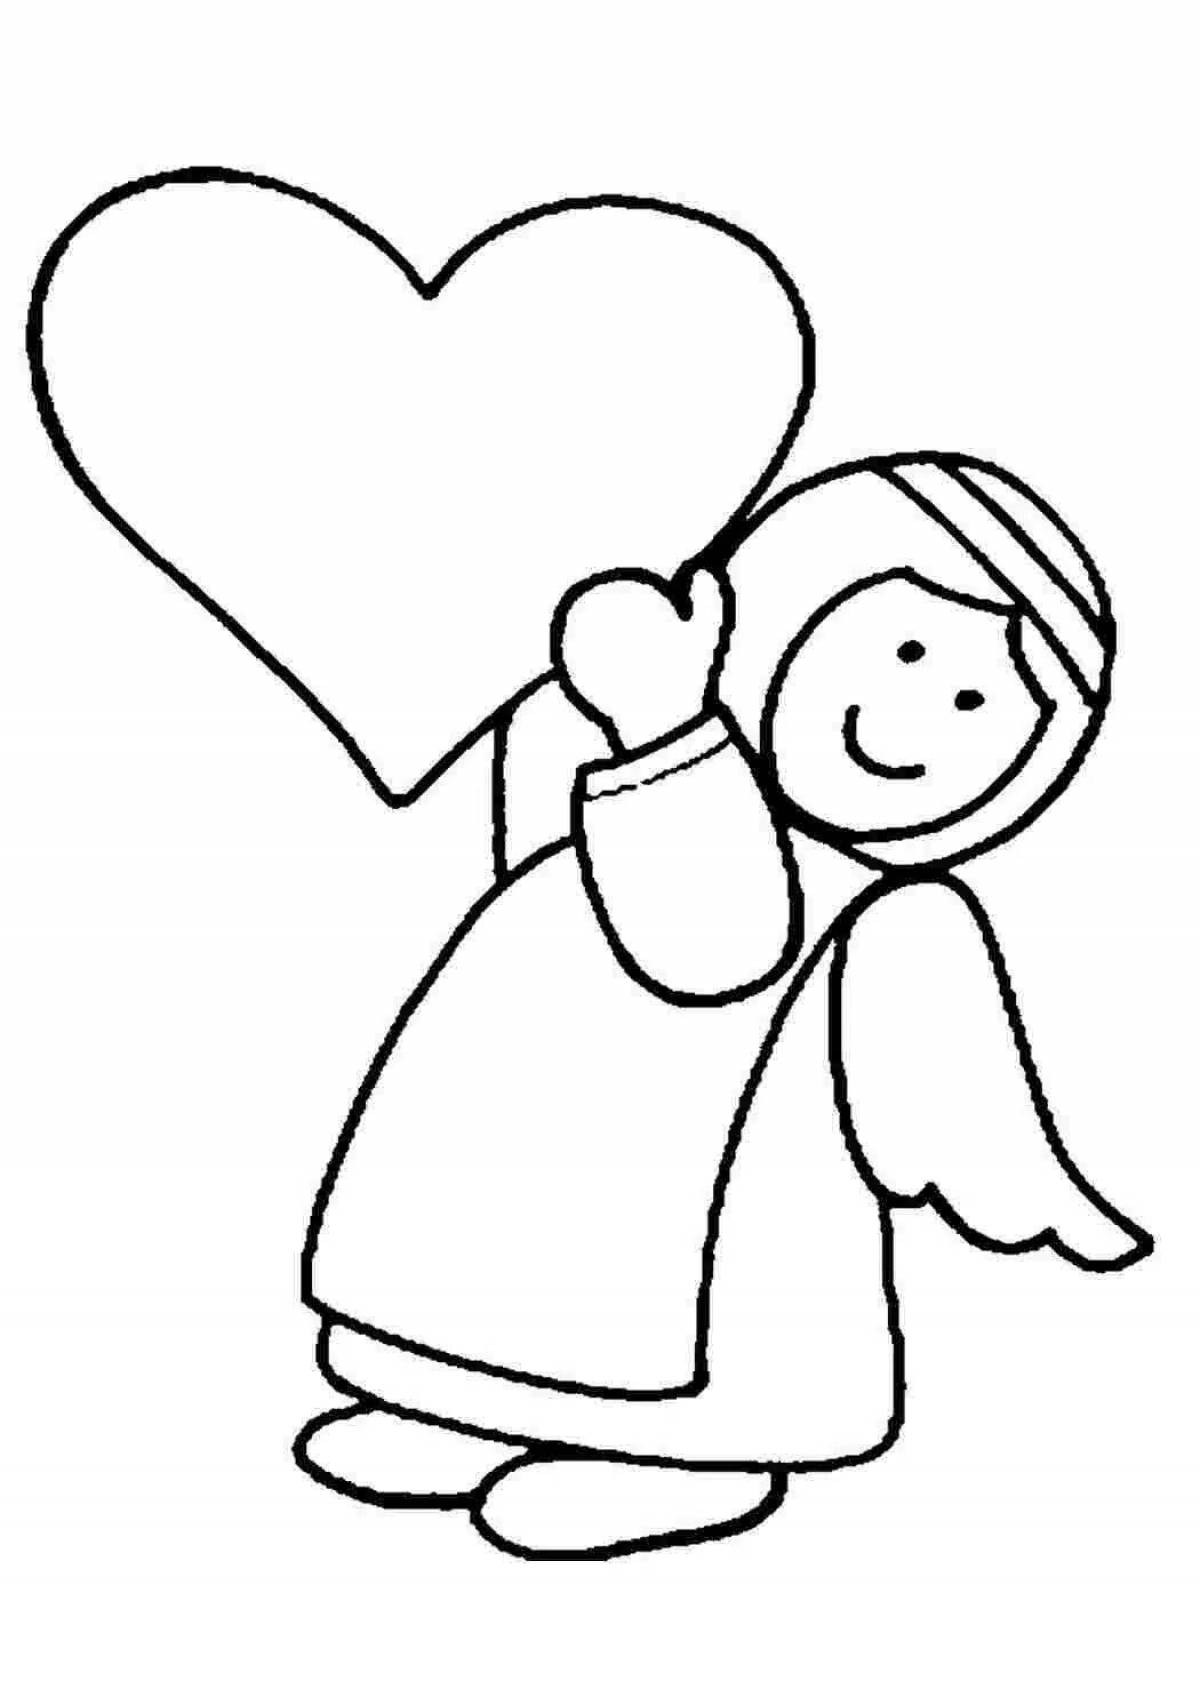 Glitter Christmas angel coloring page